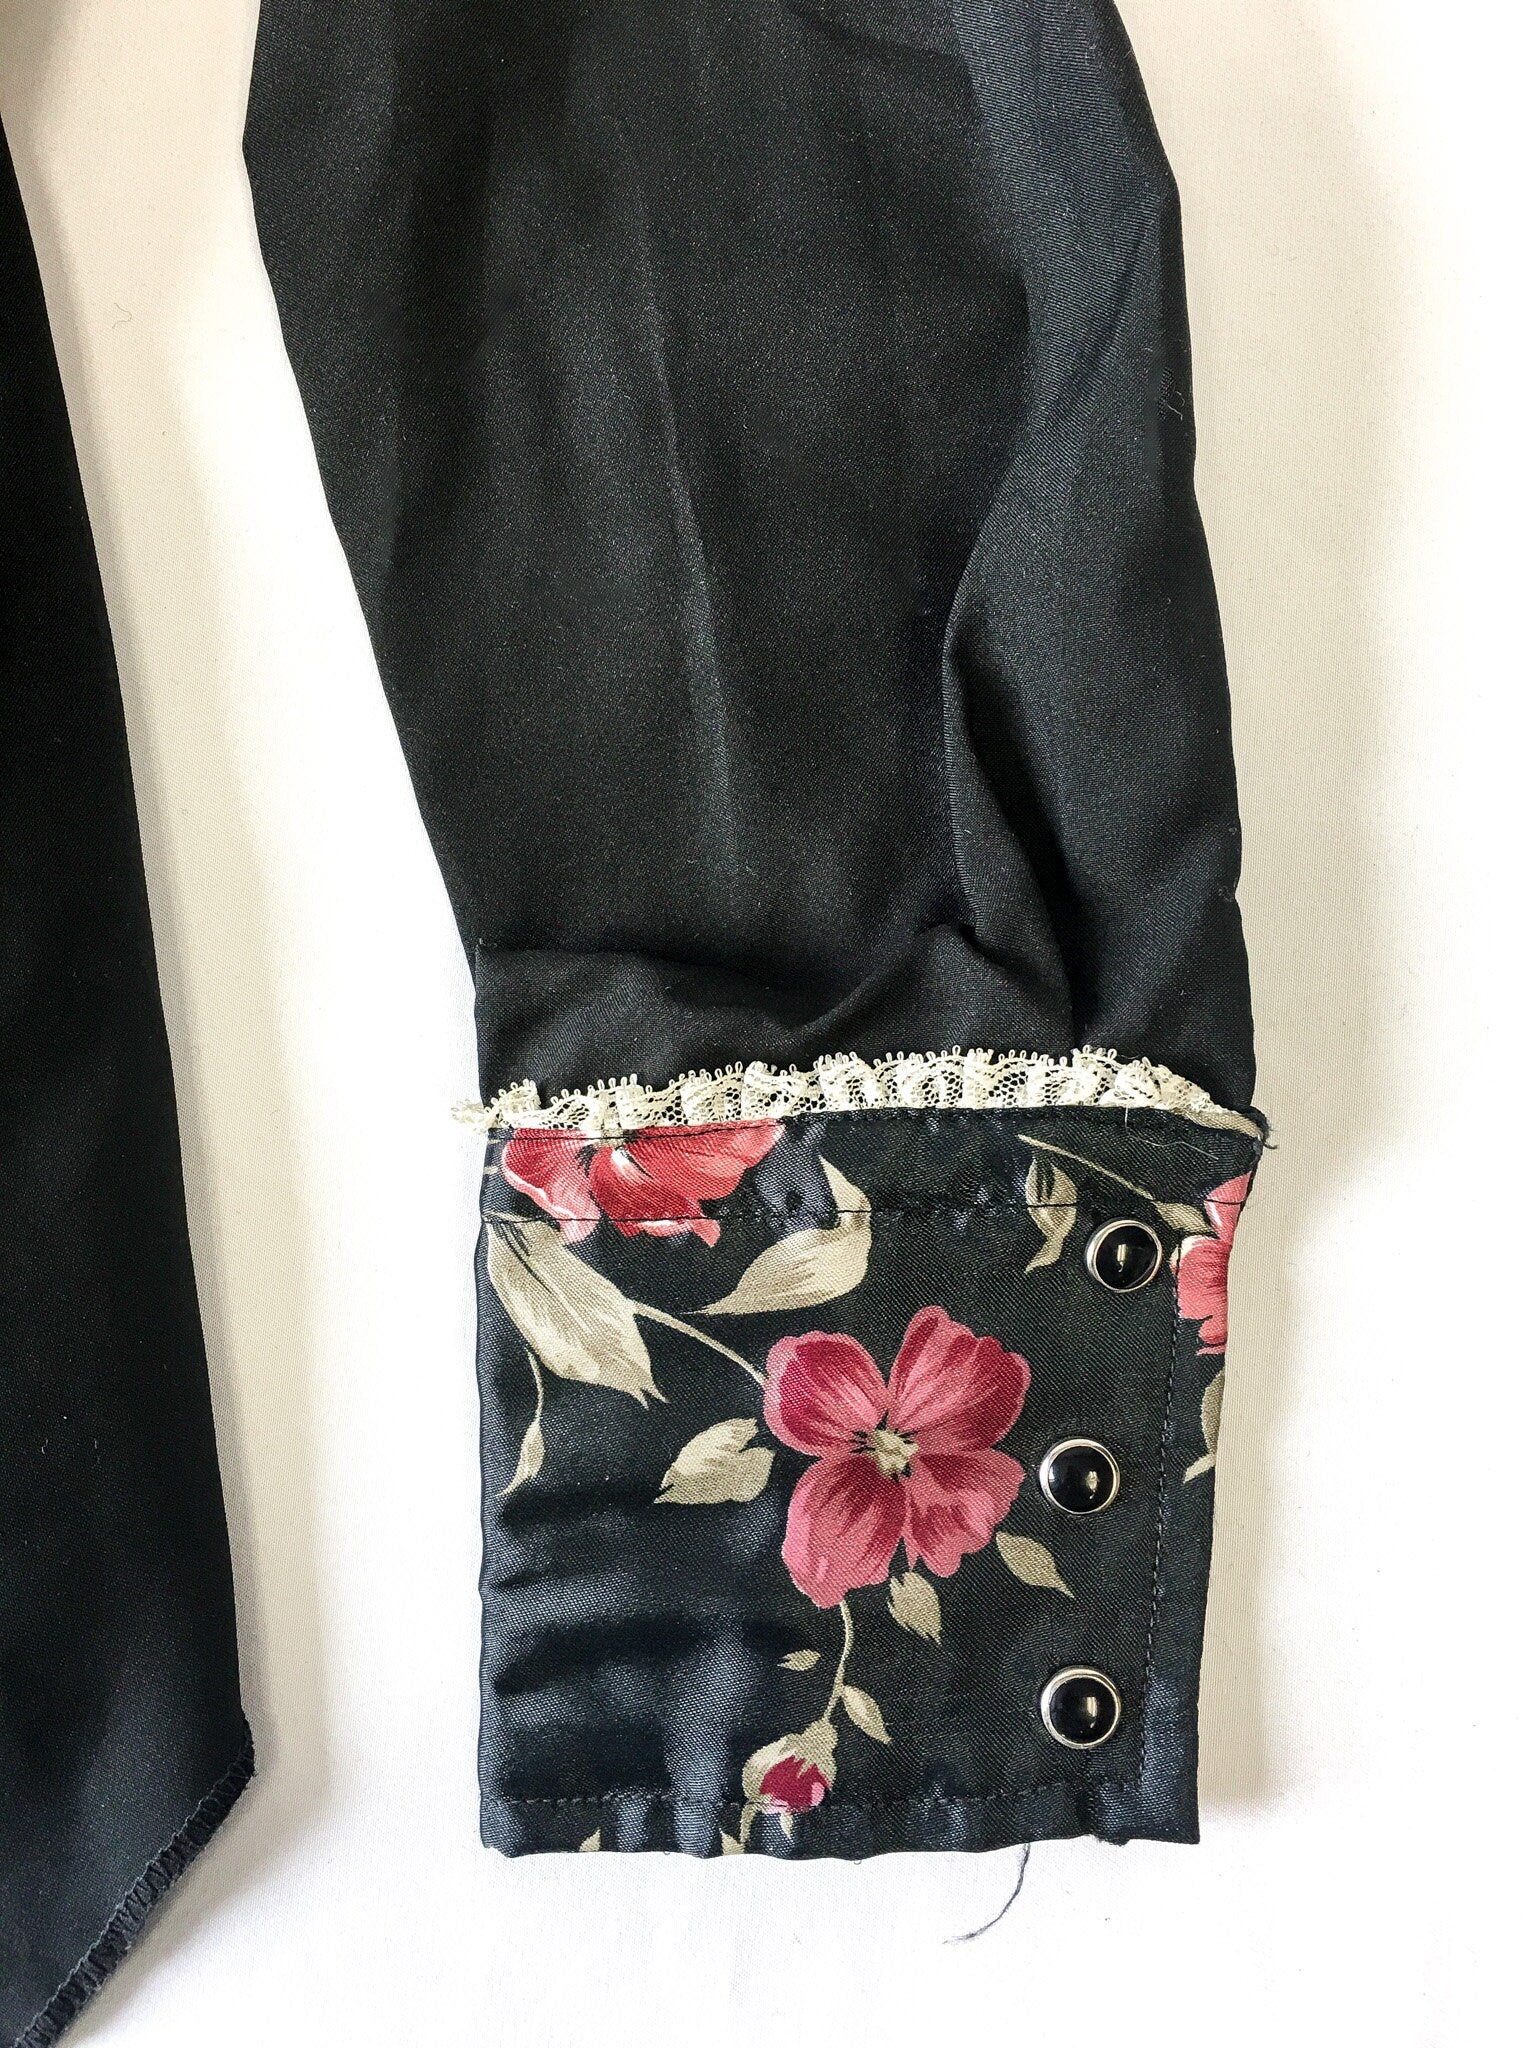 Vintage 70s Miss Rodeo America Black Floral Button Up with Detachable Chest Piece, Sz. 5/6, 70s Western Wear